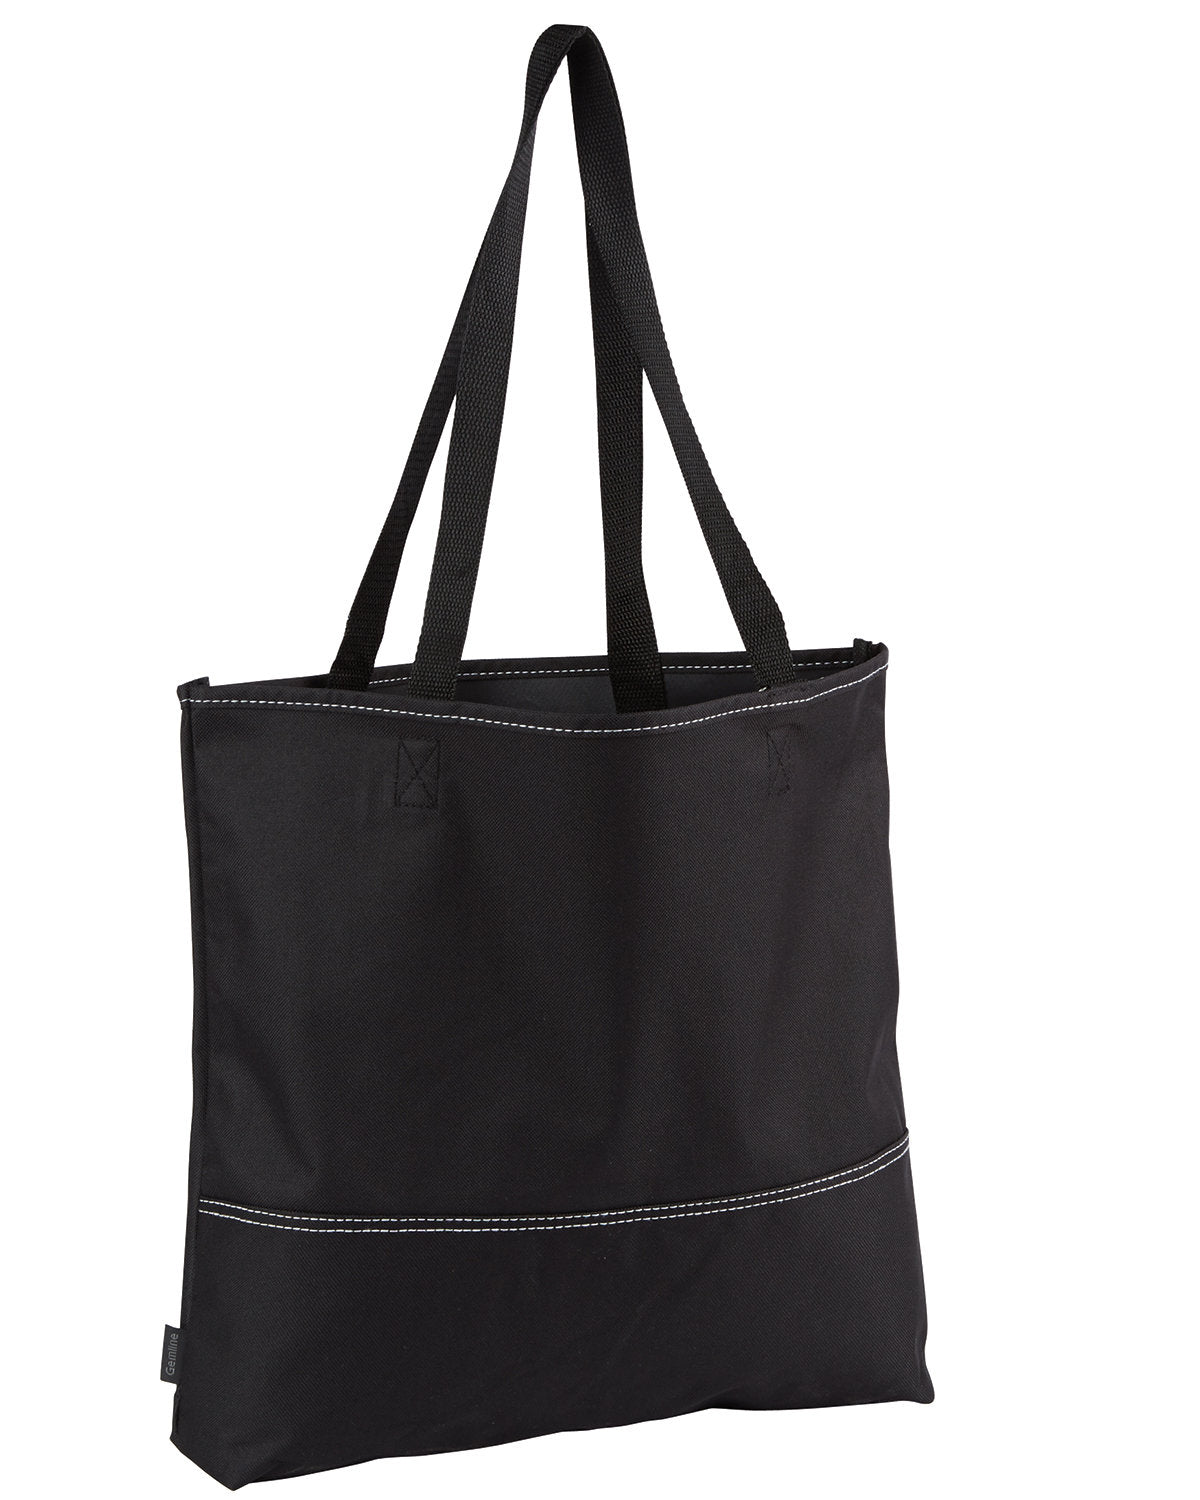 Bags and Accessories BLACK OS Gemline